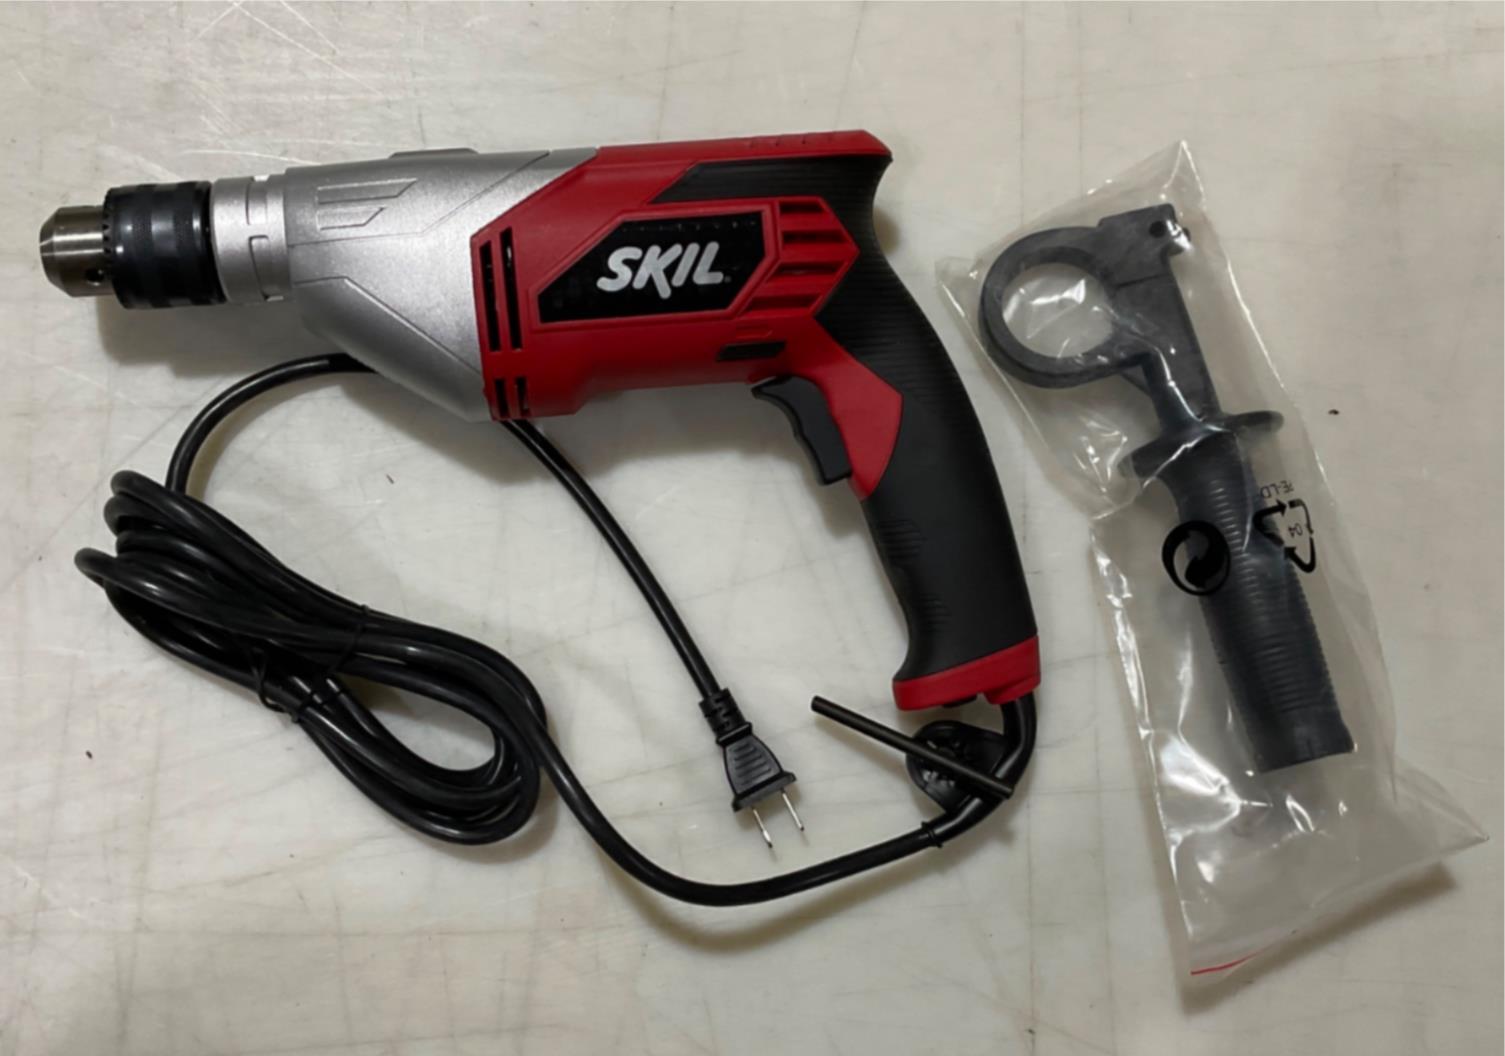 Skil 6335-01 7.0-Amps Corded 1/2-Inch Drill #11